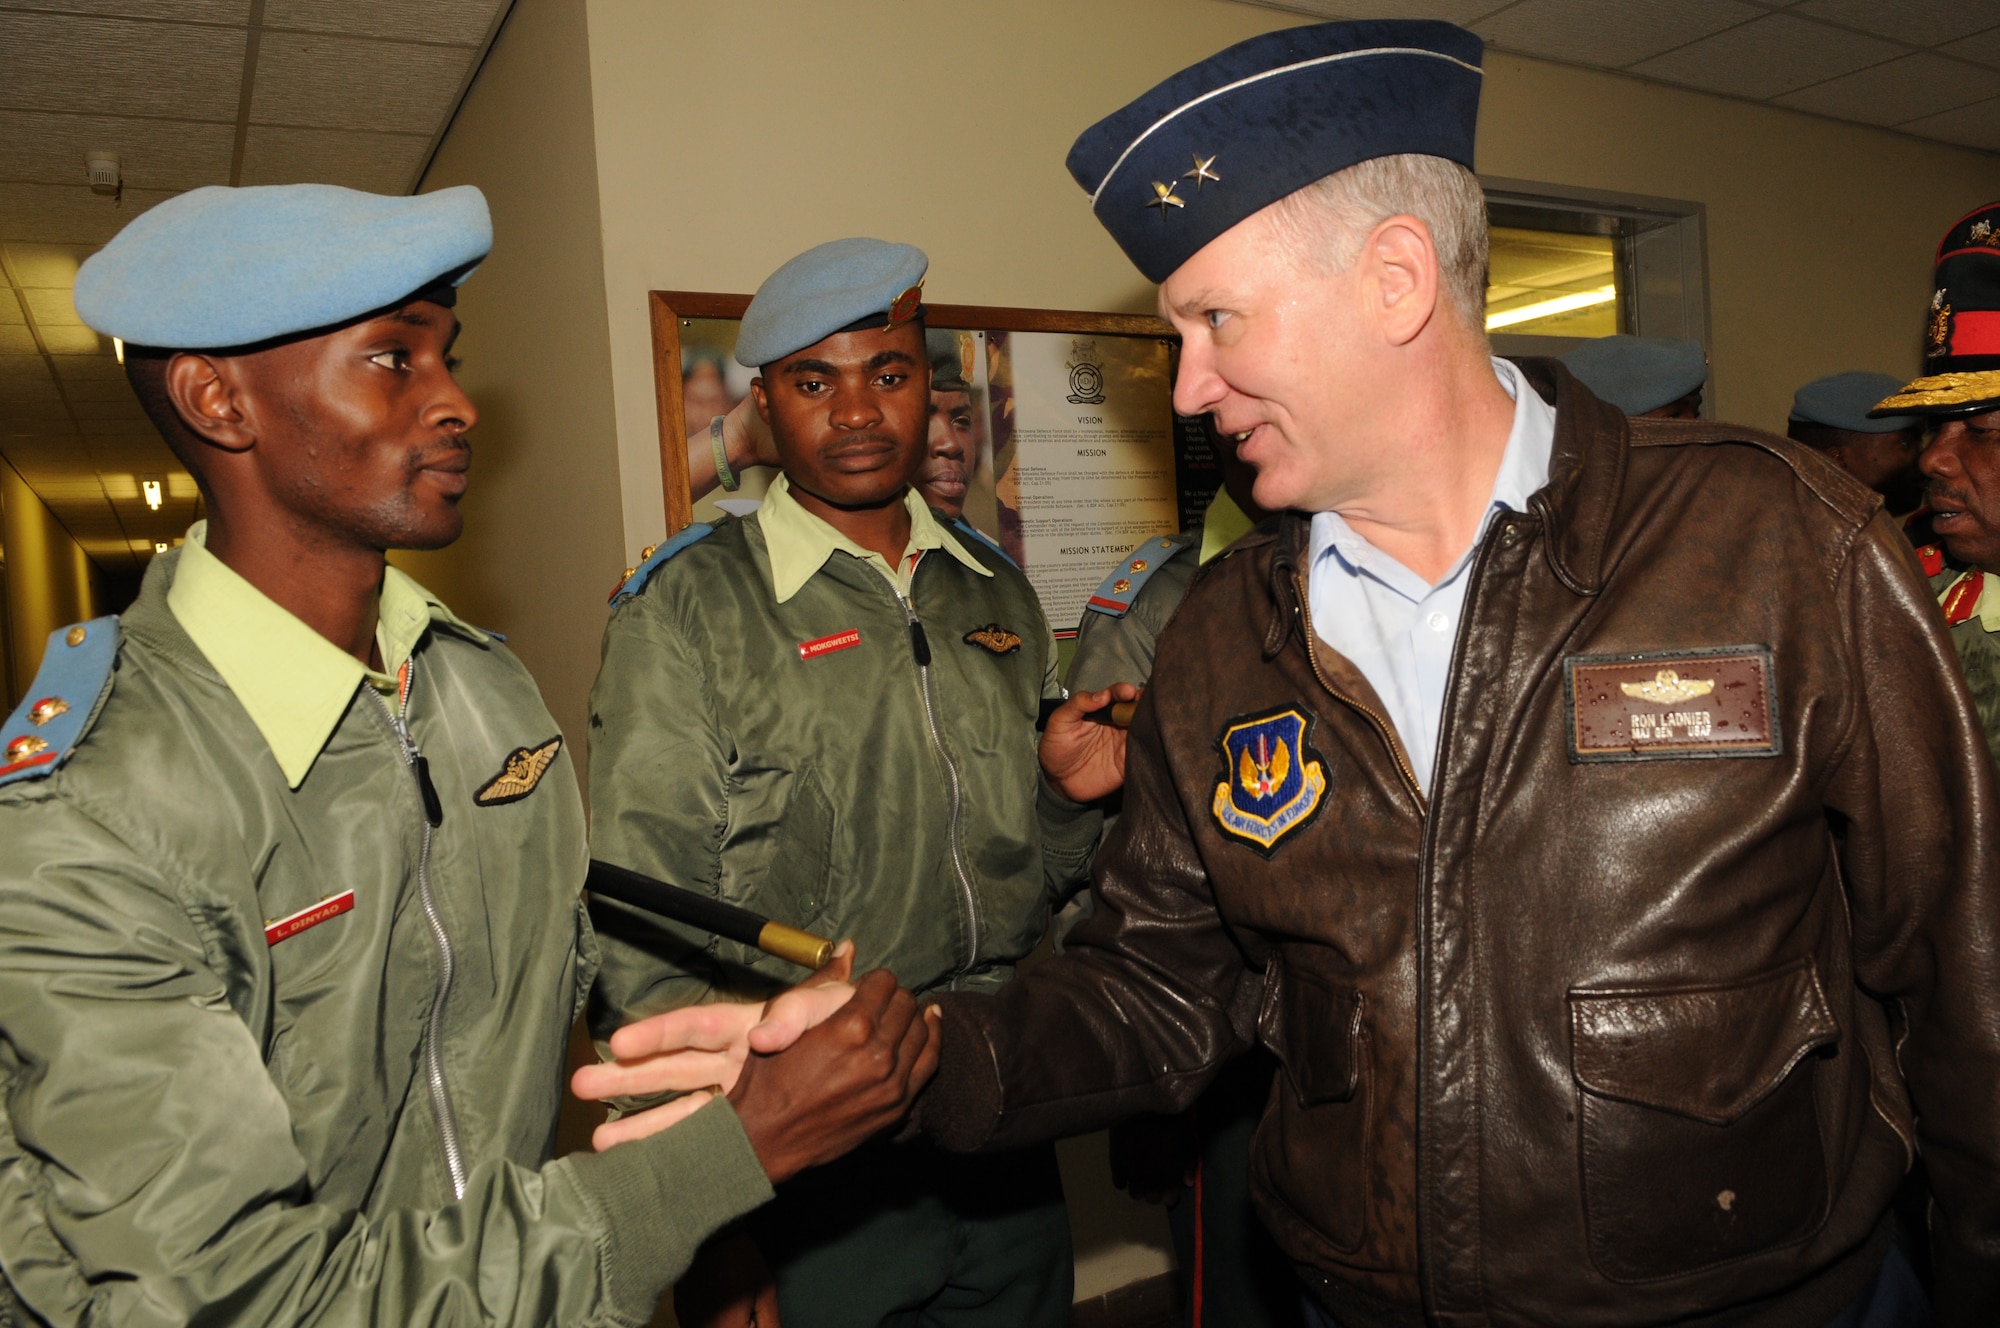 A Botswana Defense Force member shares a handshake in the local custom with Air Forces Africa Commander Maj. Gen. Ronald Ladnier during his senior leader engagement visit to Botswana June 9.